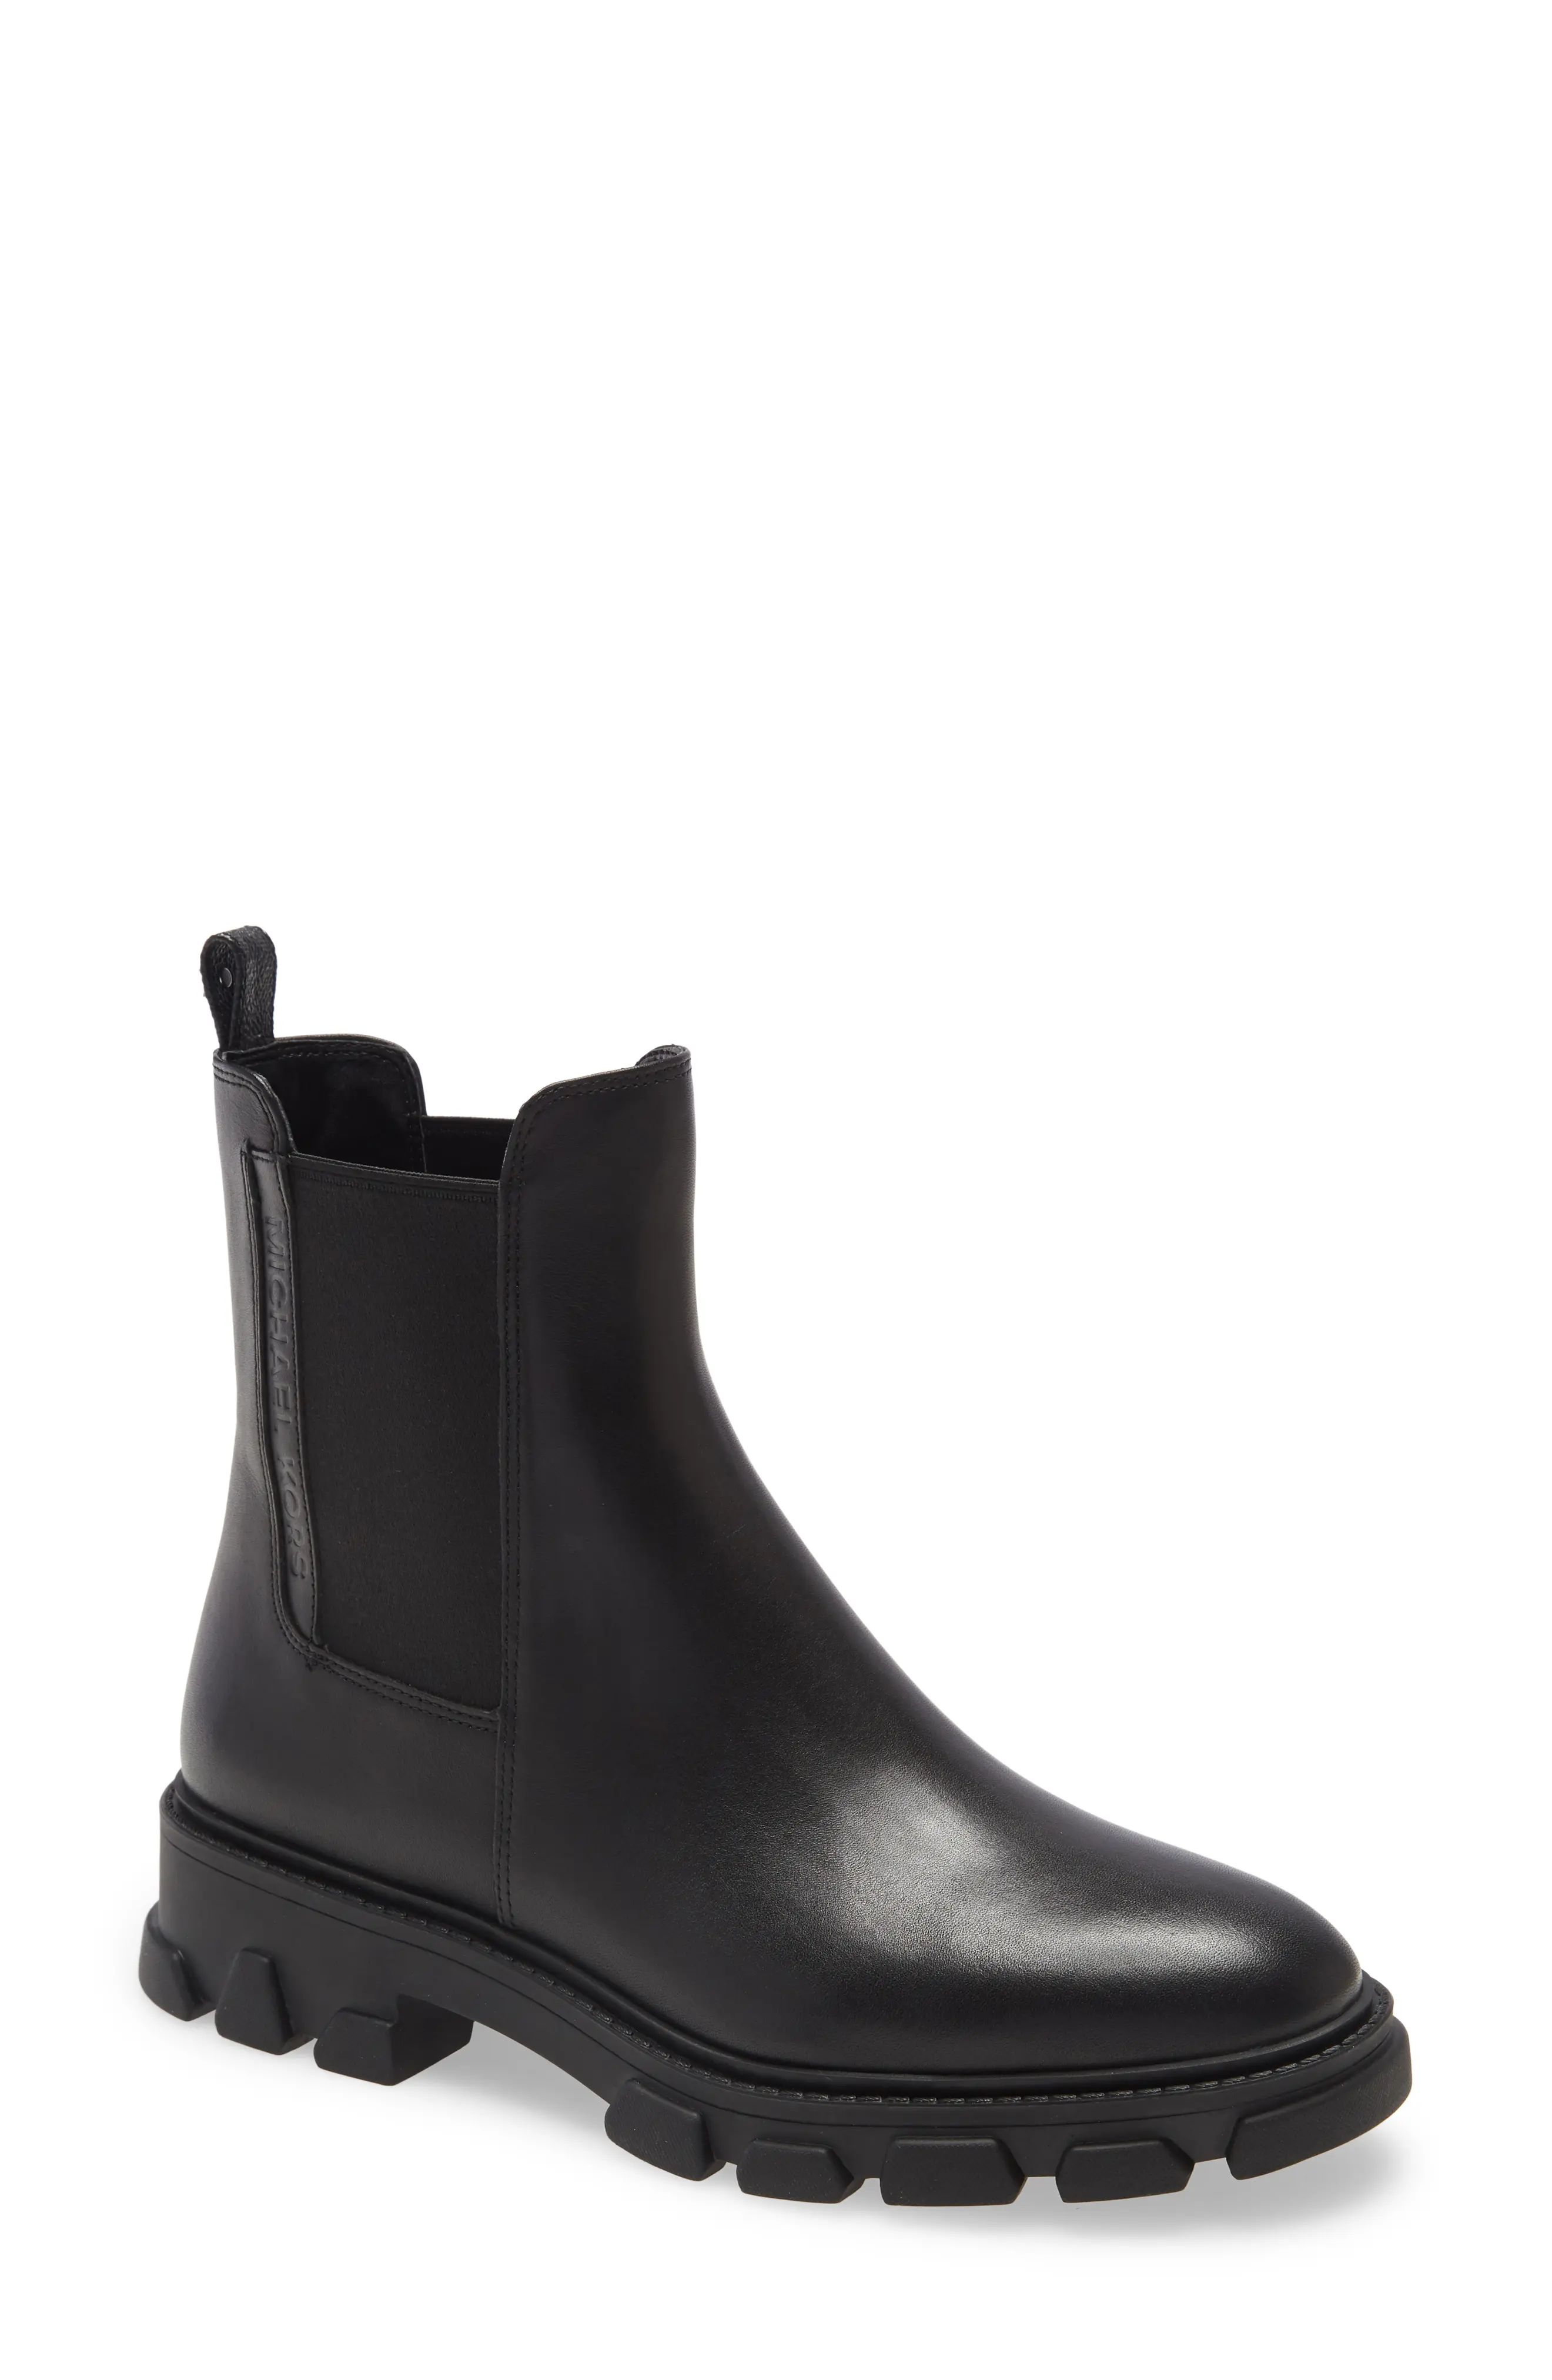 MICHAEL Michael Kors Ridley Bootie in Black Vachetta Leather at Nordstrom, Size 9.5 | Nordstrom